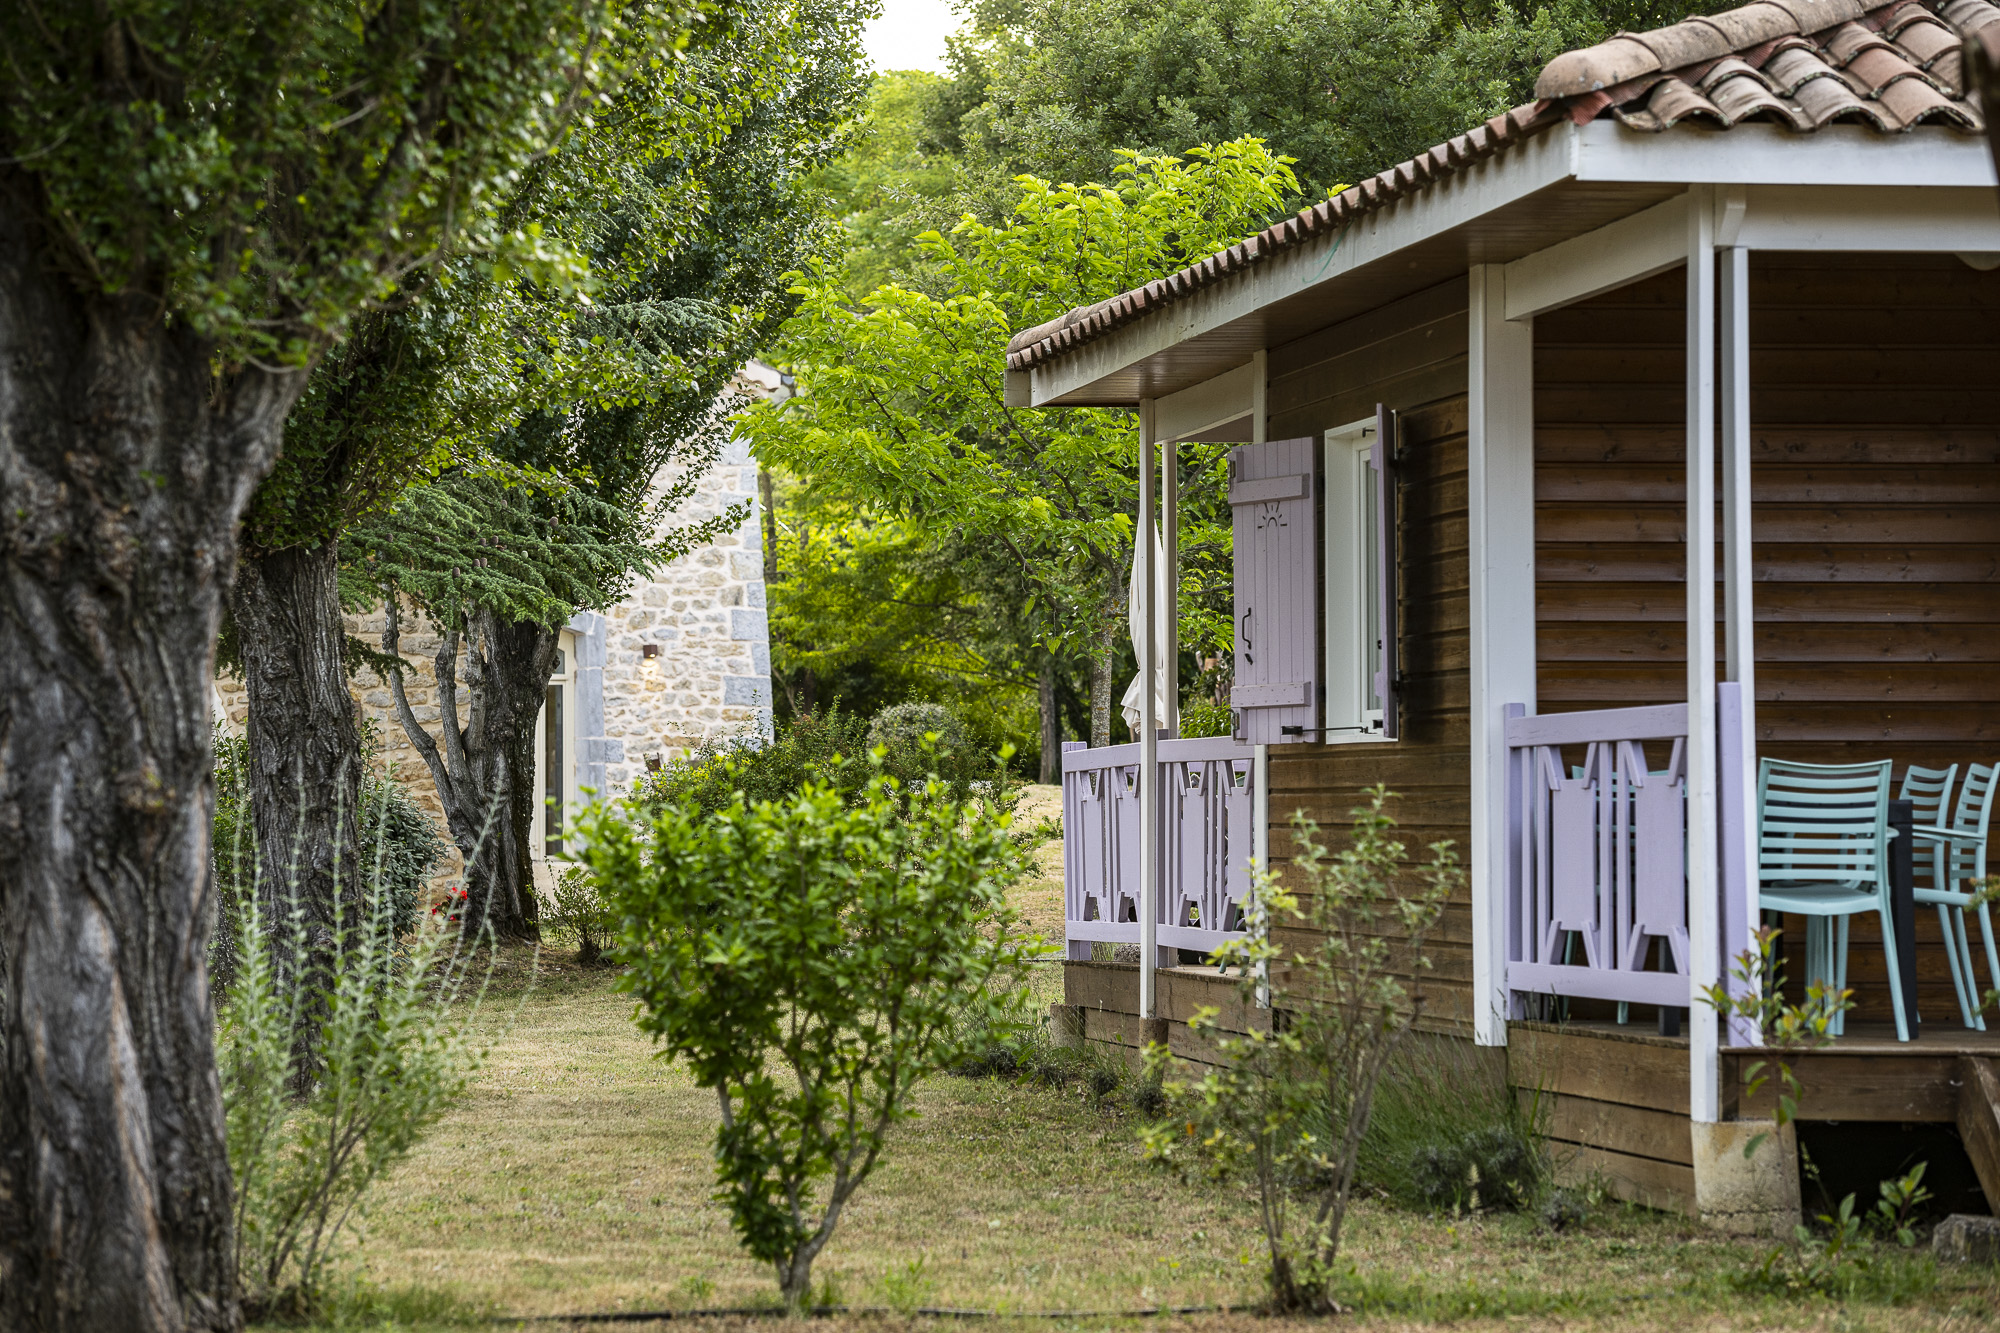 Accommodation - Chalet 2 Bedrooms Of 2 Single Beds- 1 Bathroom - Olivier Pmr (Adapted To The People With Reduced Mobility) - Castel Domaine de Sévenier & Spa